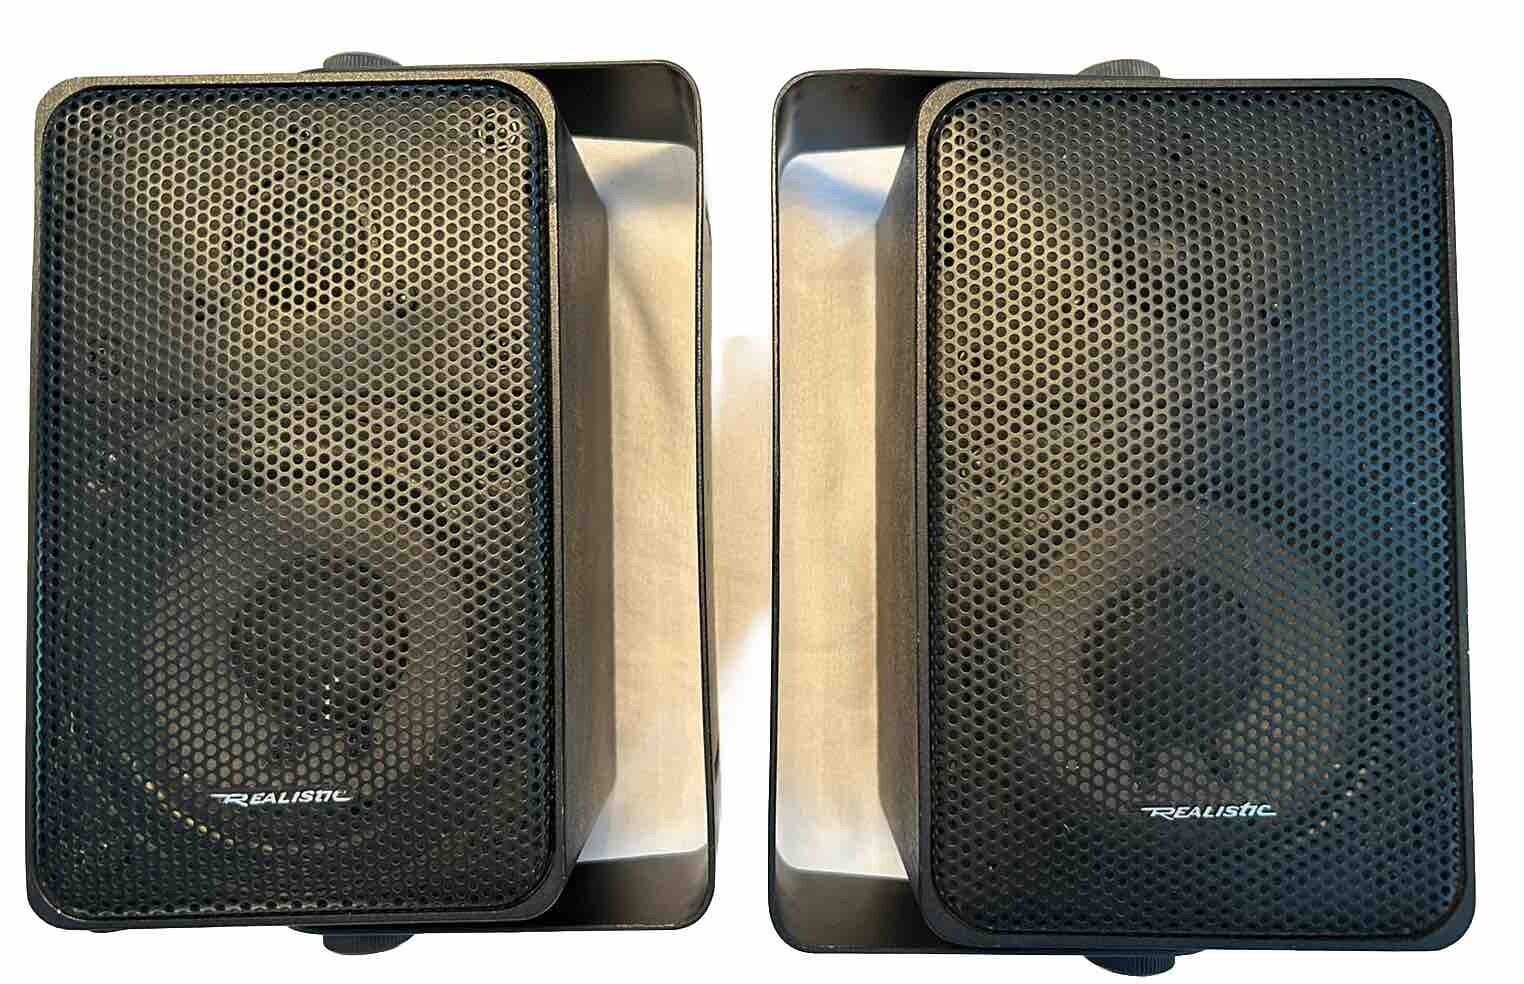 PAIR of Realistic Minimus 7 Japan Speakers GREAT CONDITION w/ Mounting Brackets